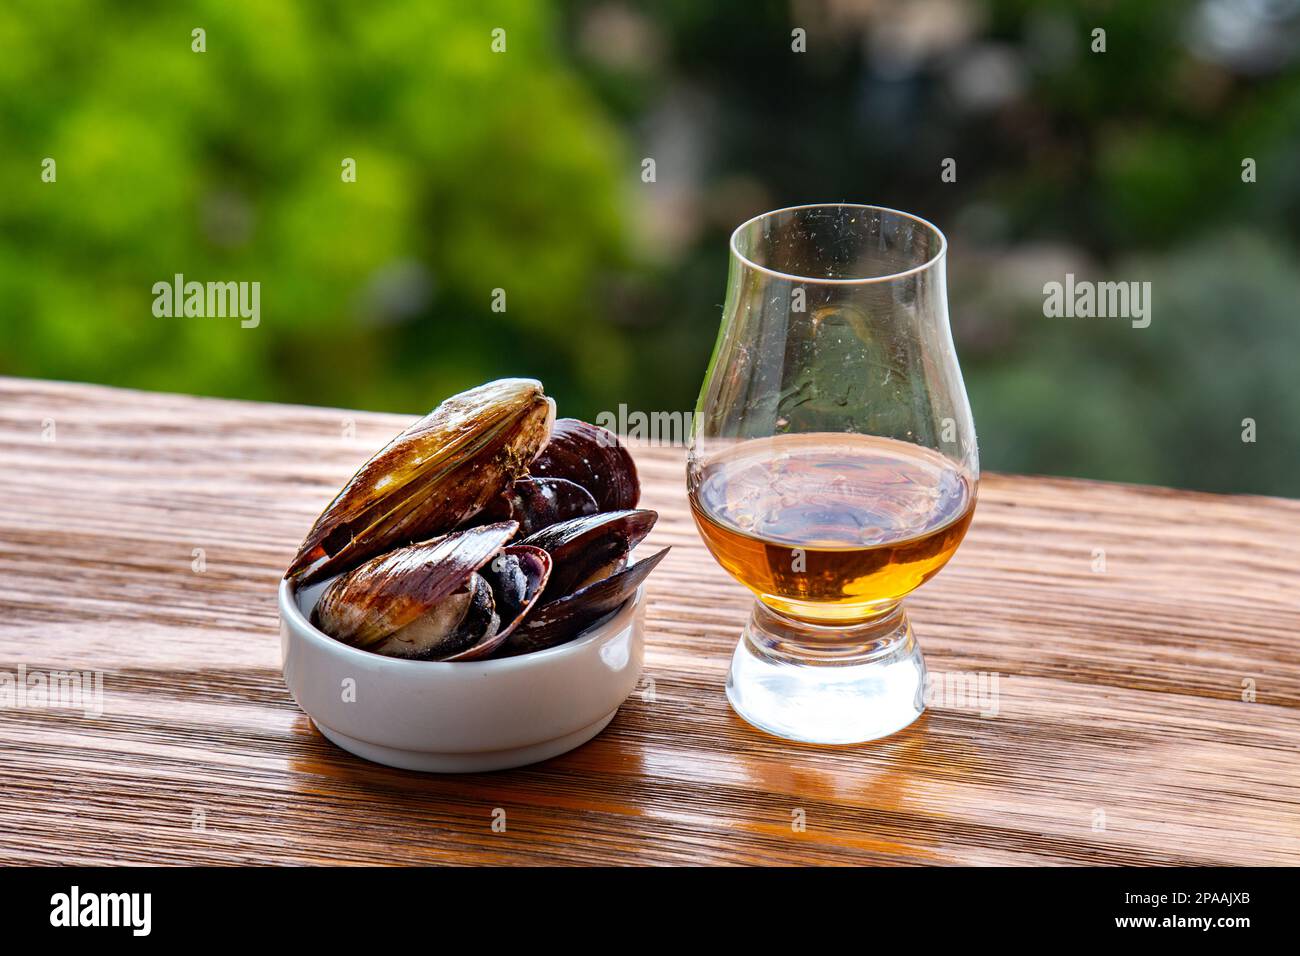 Buffalo Trace Whiskey droit bourbon Kentucky. Banque D'Images